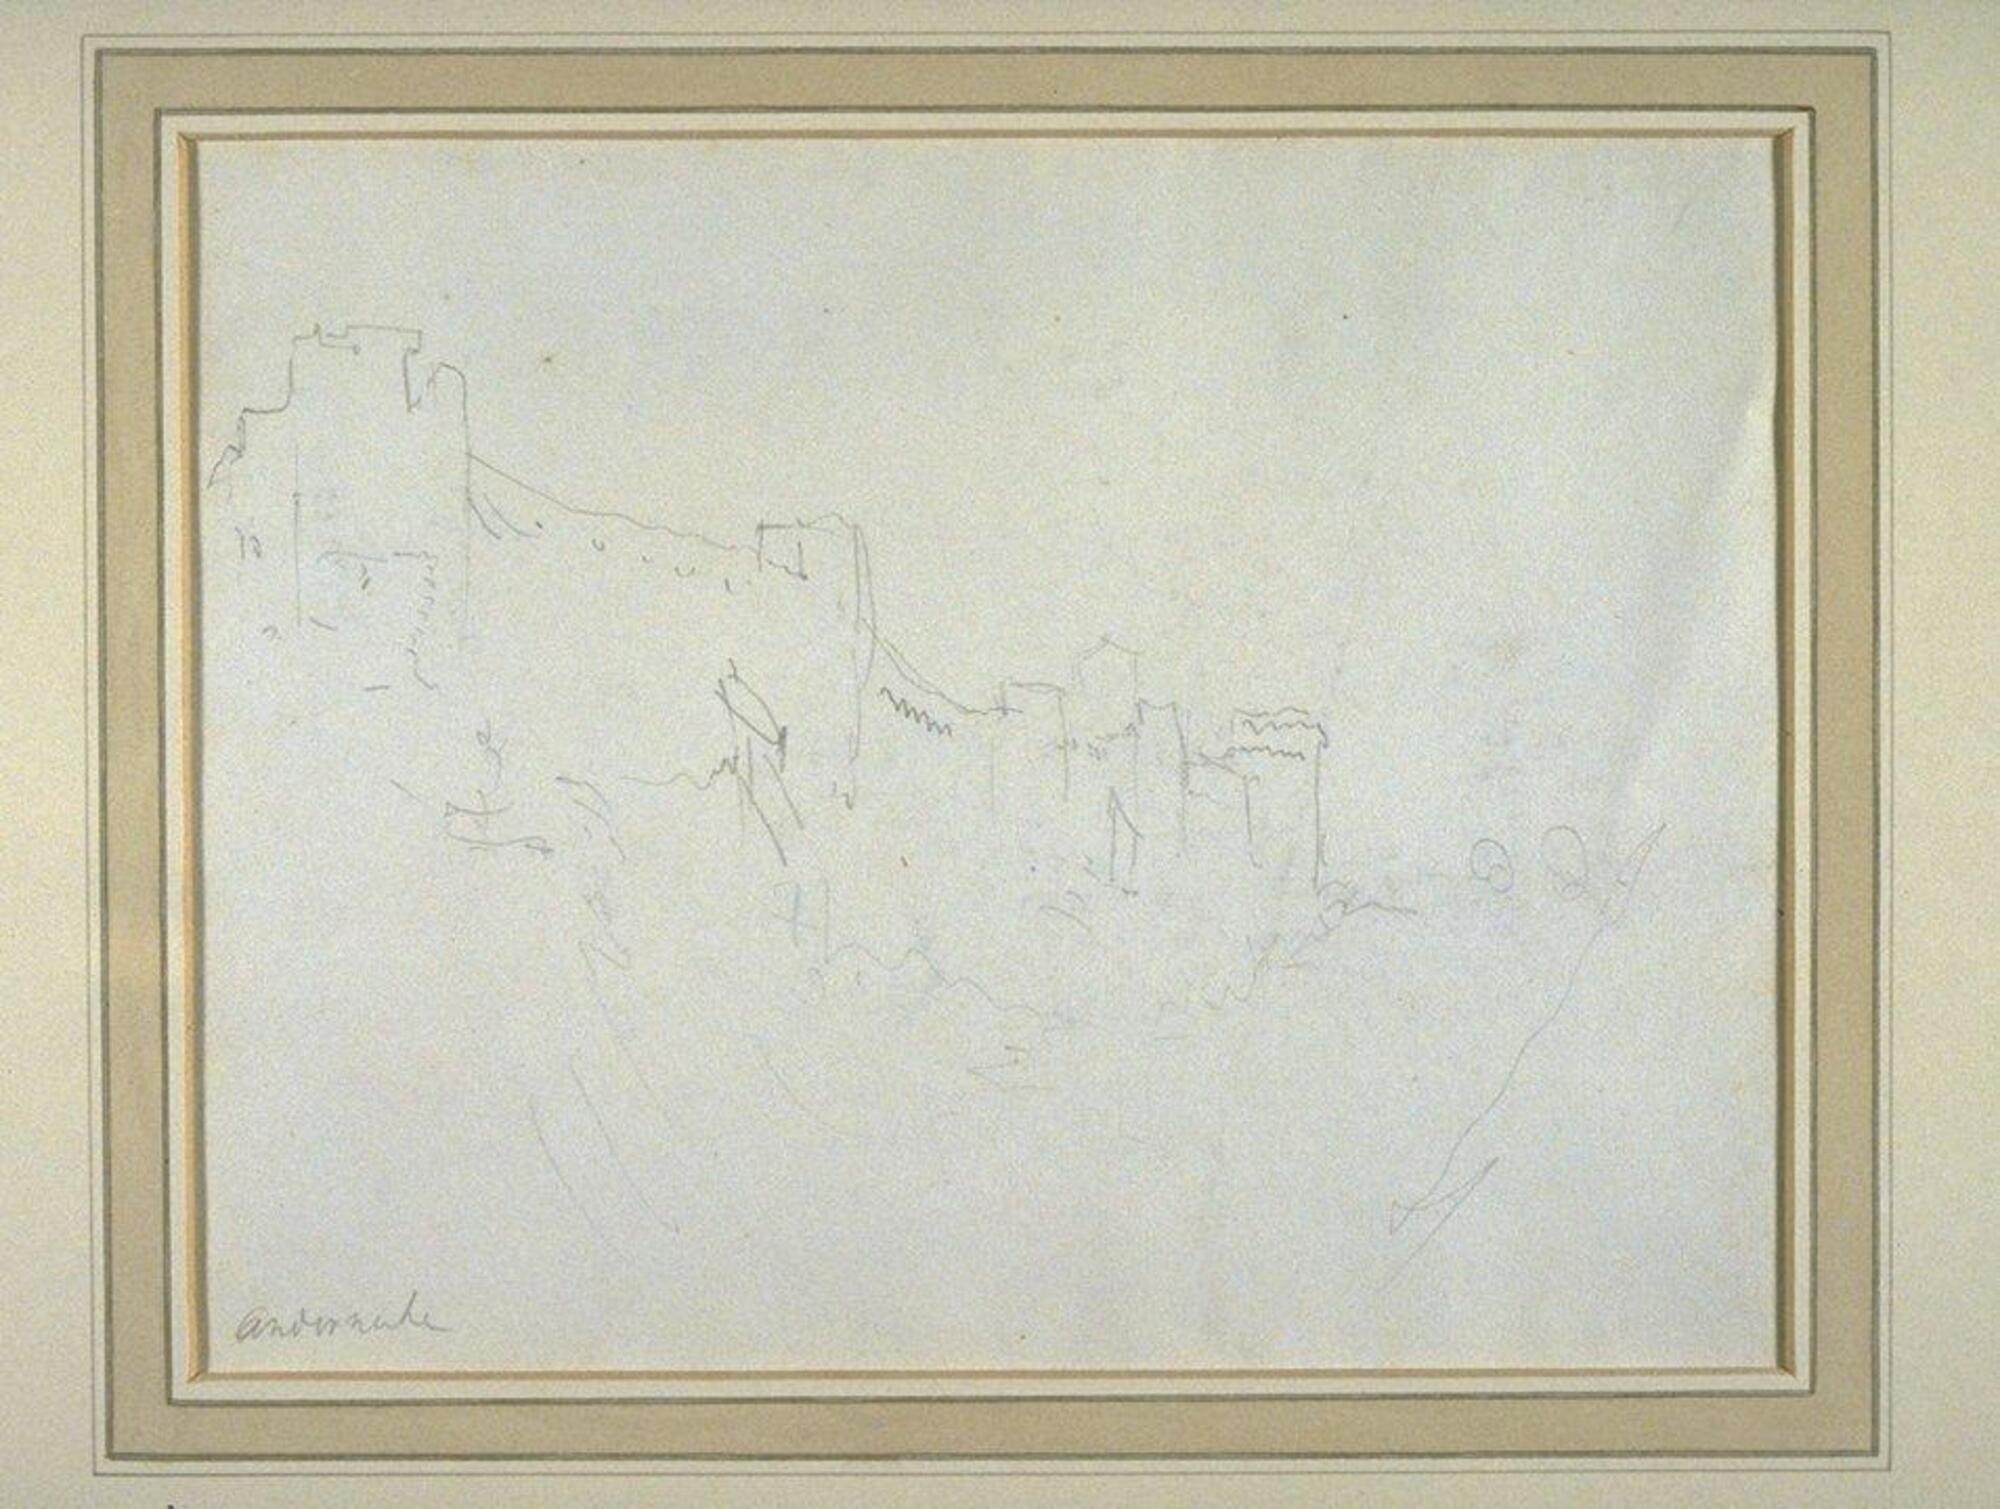 Line drawing that extends from upper left corner and down diagonally. Bottom Left corner has handwritten note that says " Andernache."